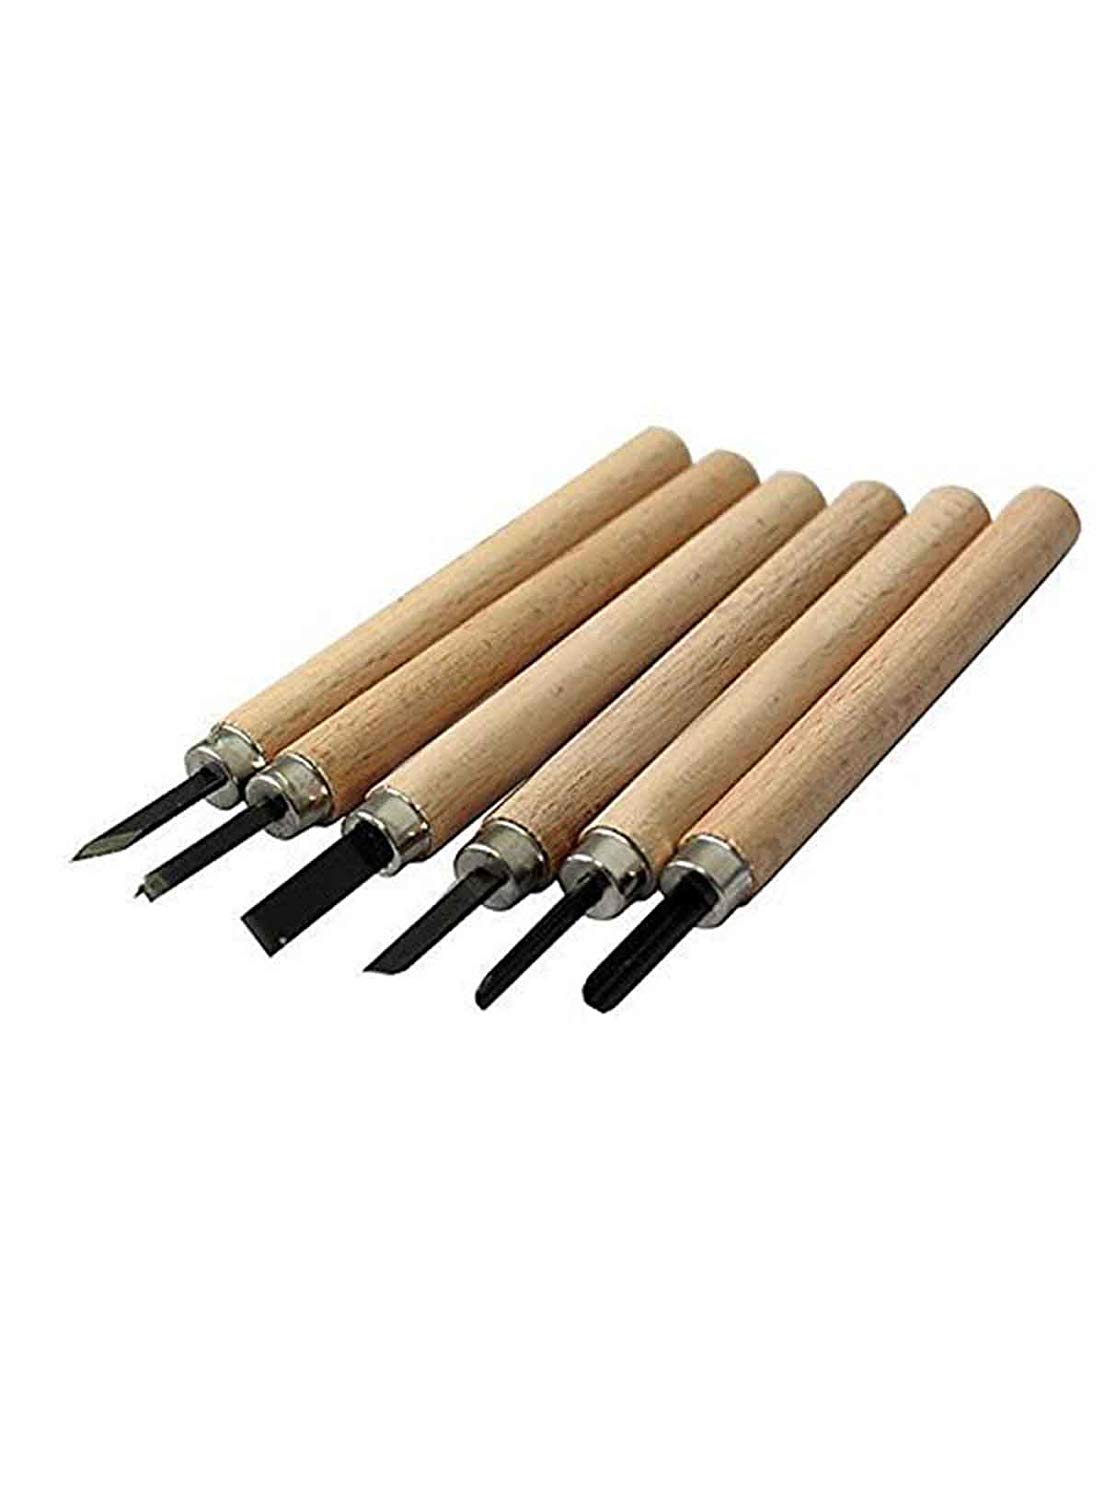 Wood-Carving Tool Set for Professionals, Carpenters and Hobbyists, Art Tools (Brown) - 6pc